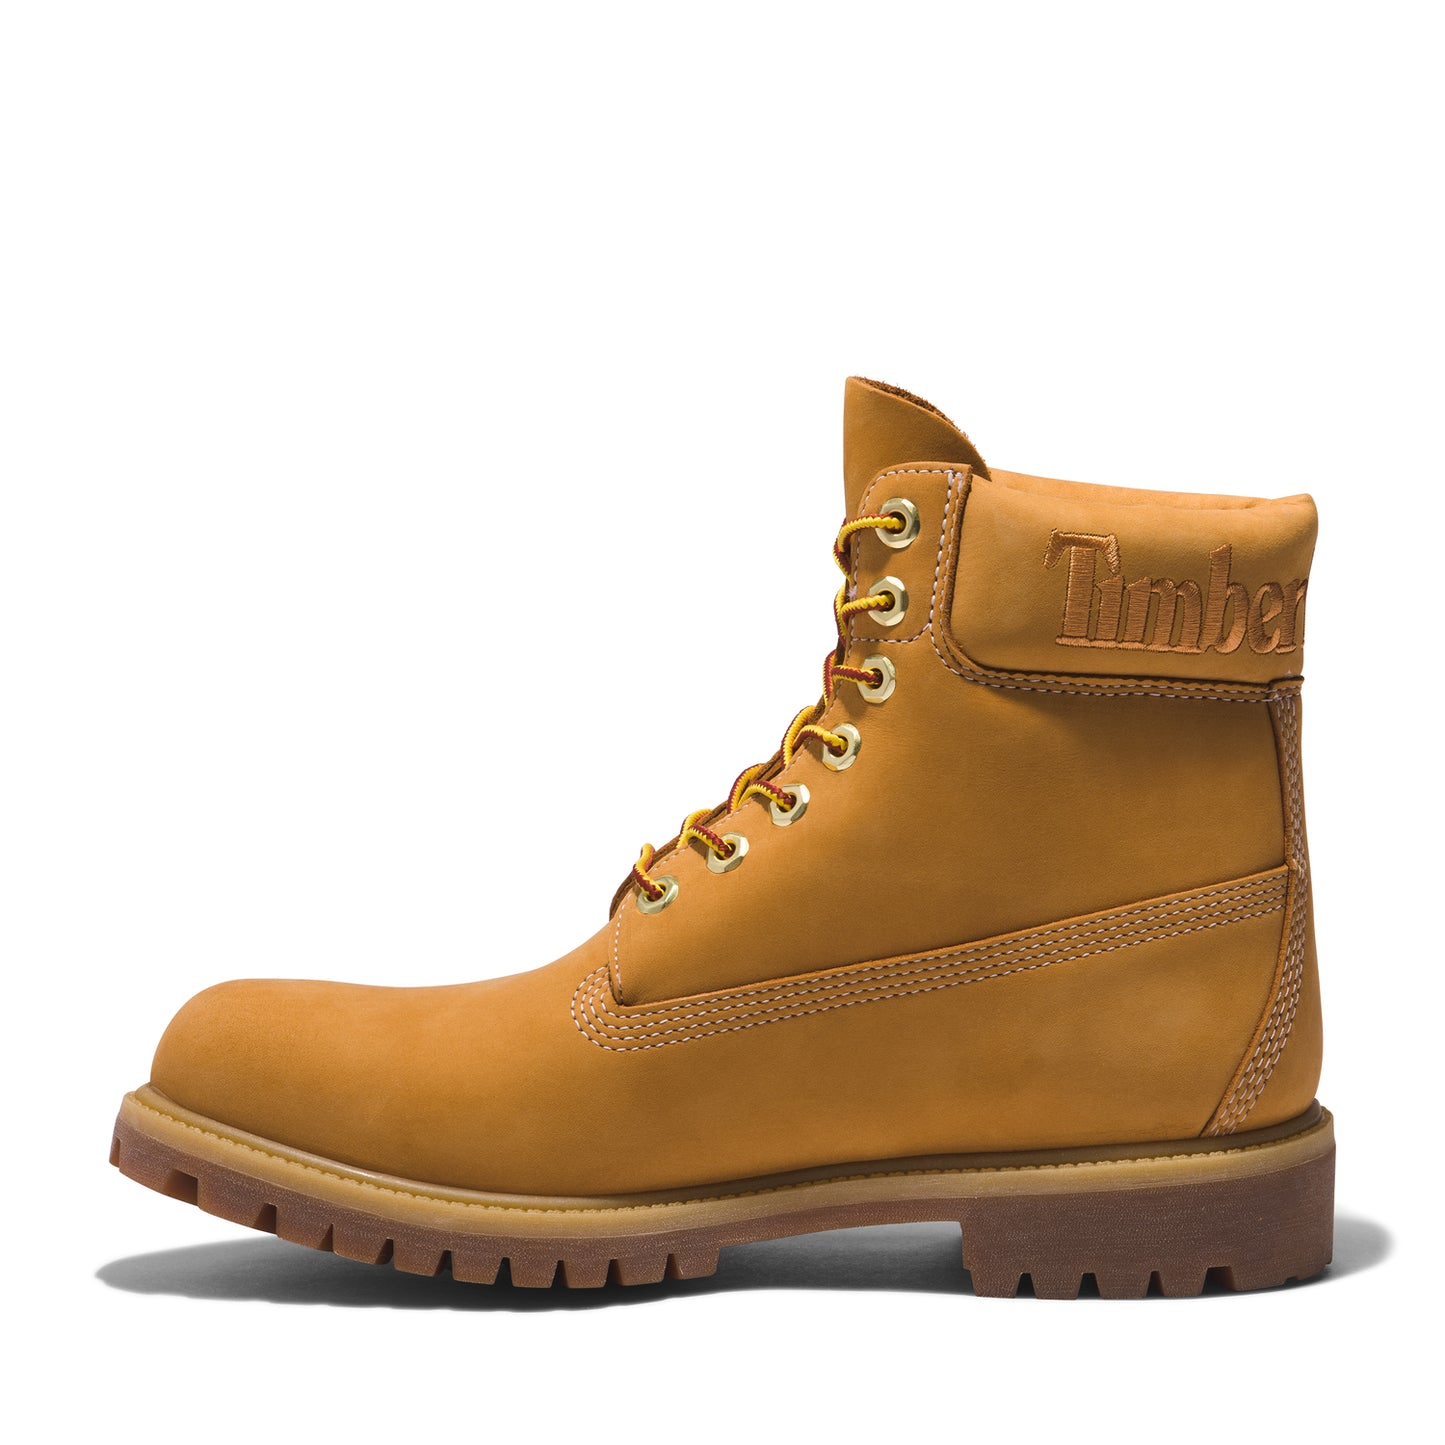 Mens 6-Inch Premium Waterproof Boot Wheat Nubuck Limited Edition GOLD BADGE - (TB0A5PJP 231) - PY- R2L17